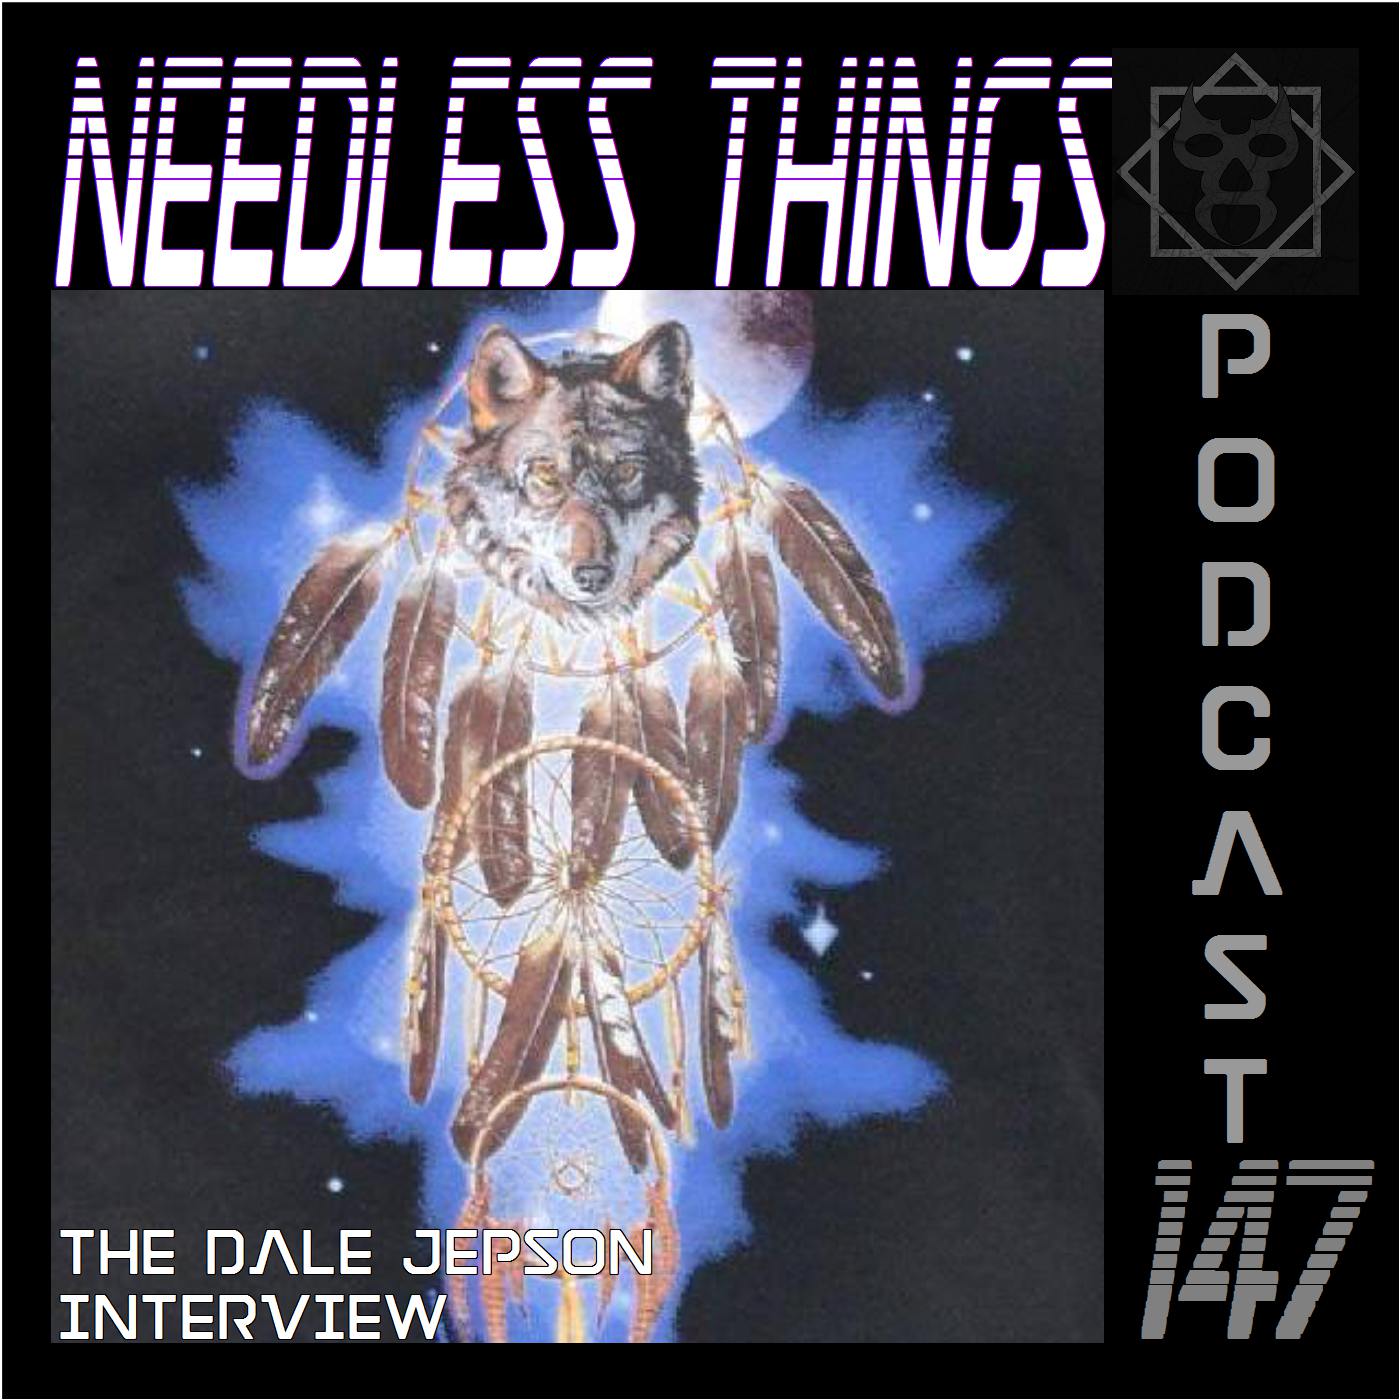 Needless Things Podcast 147 – The Dale Jepson Interview